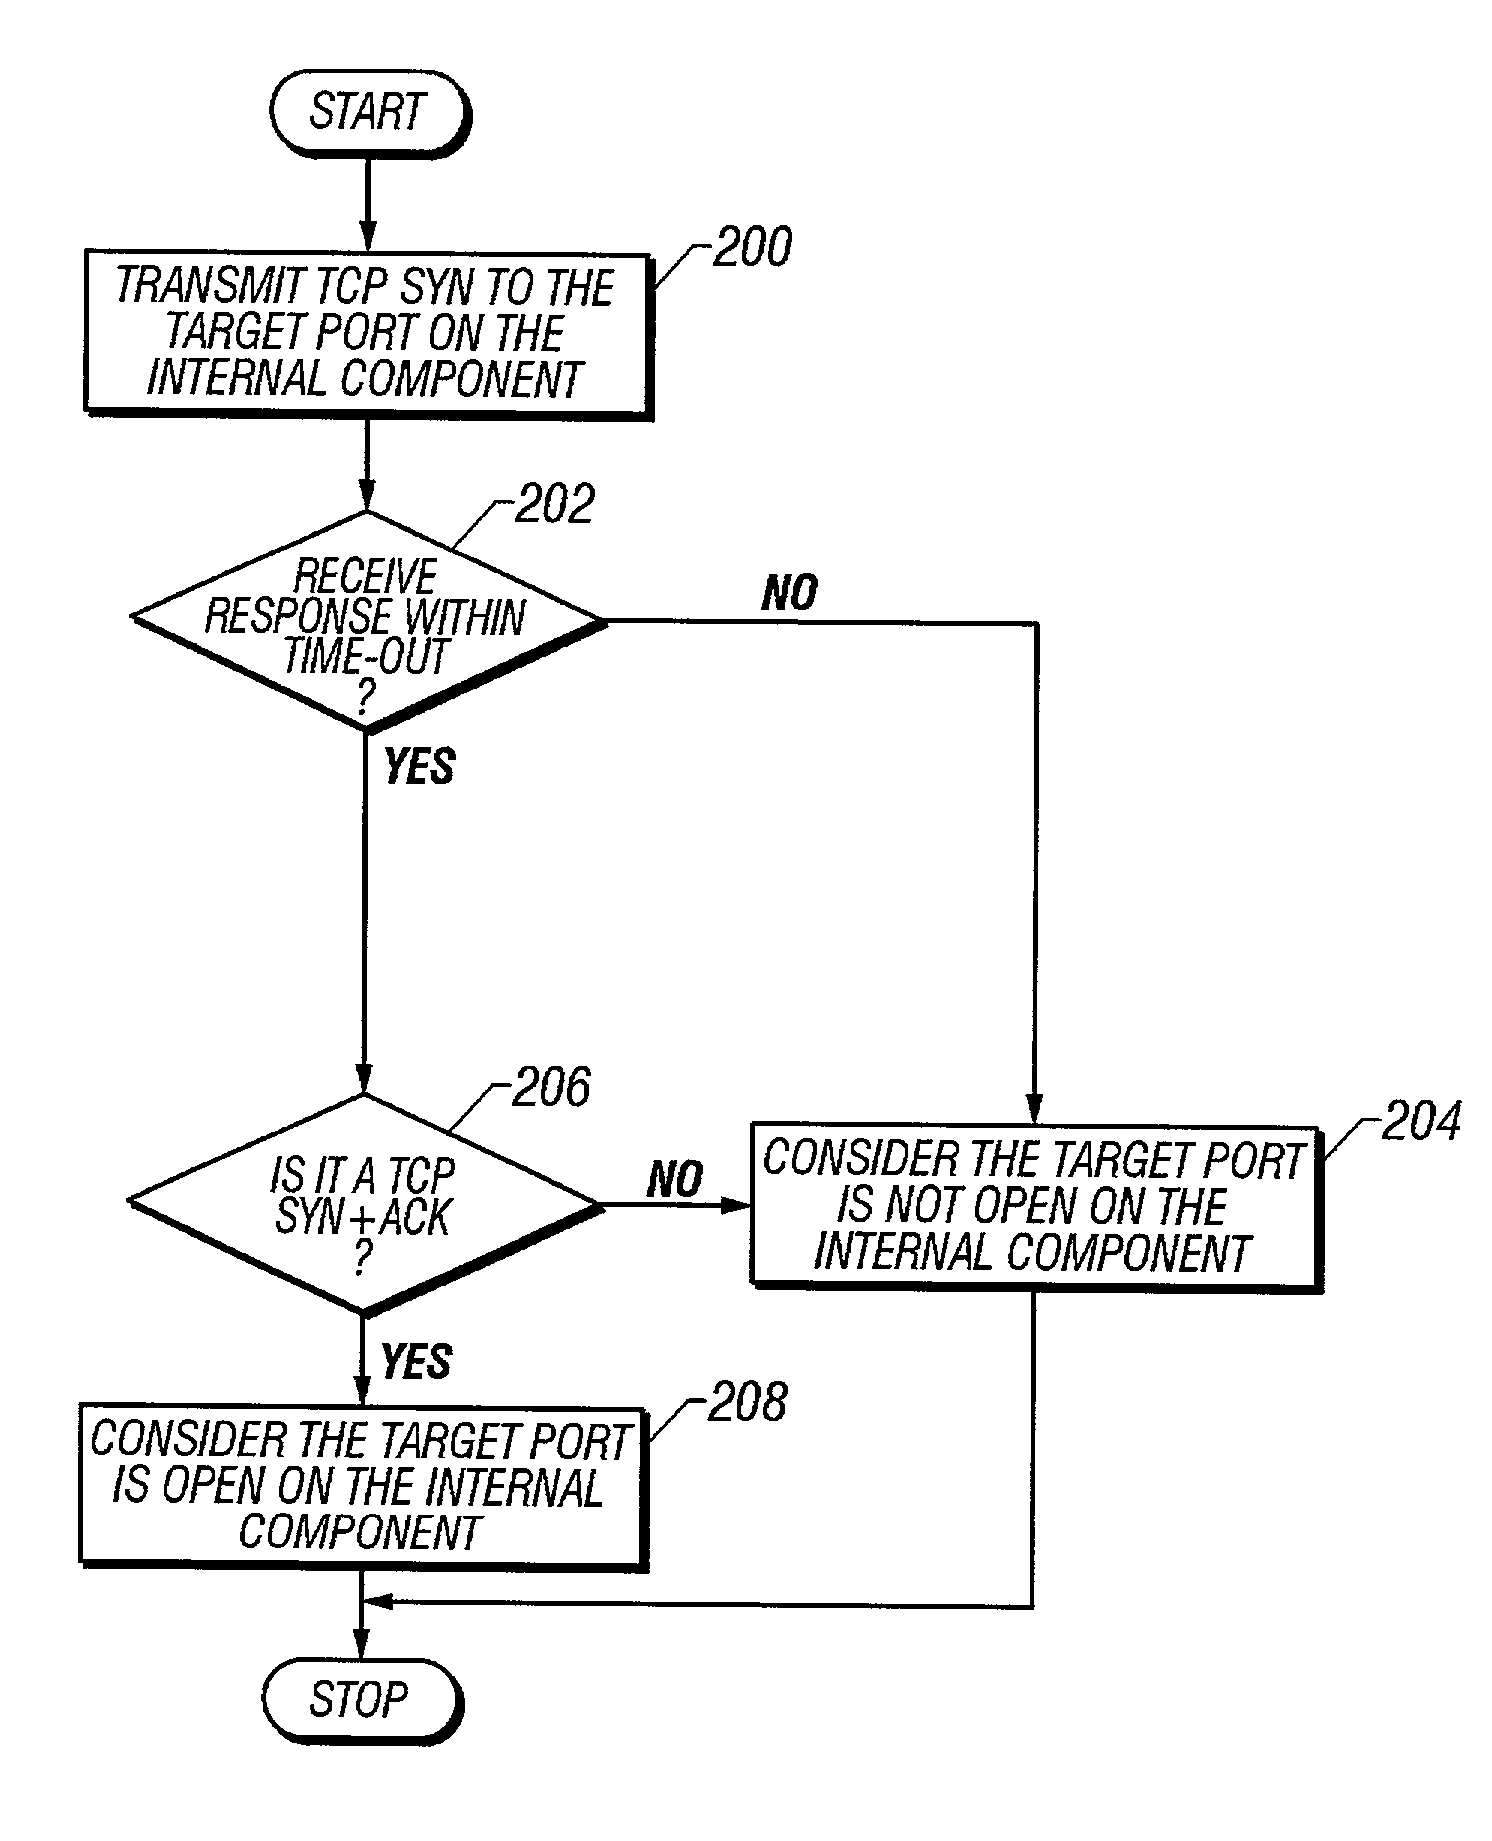 System and method for managing dynamic network sessions